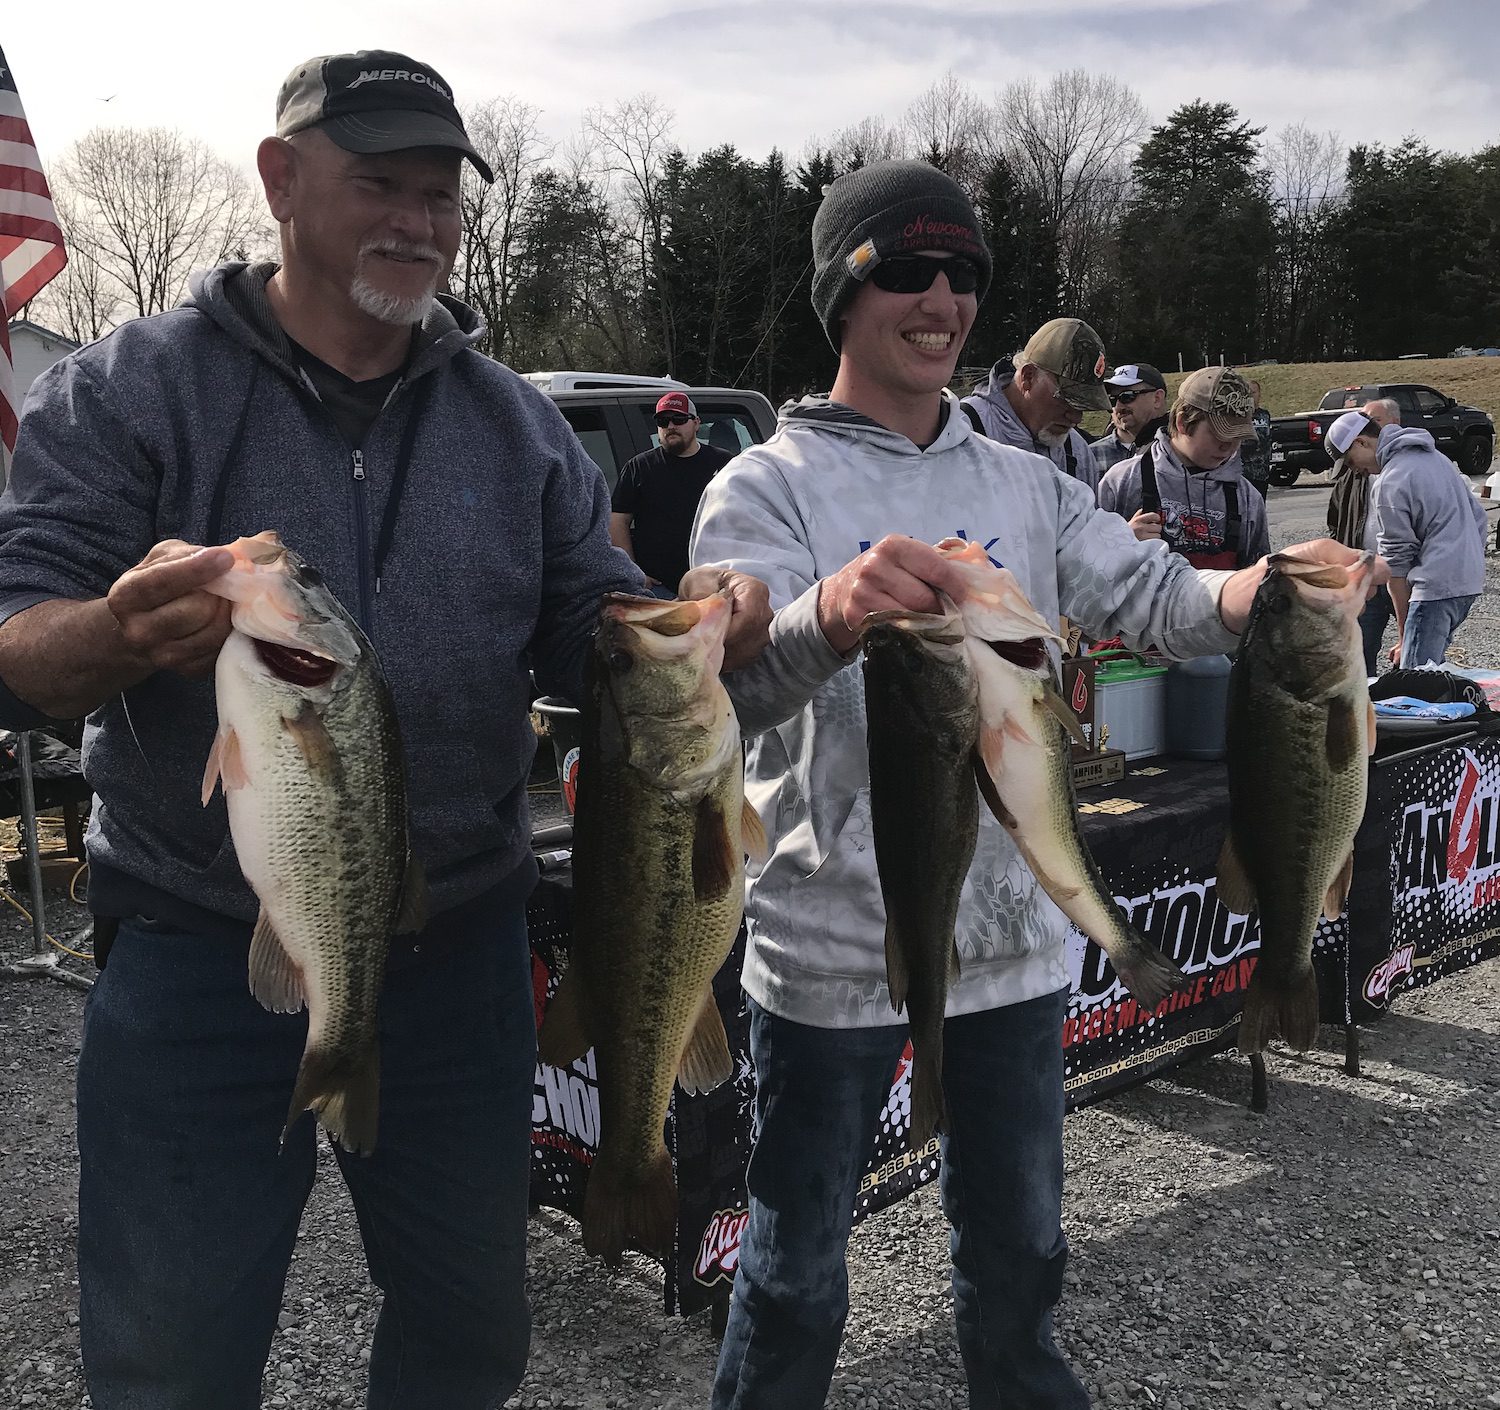 Dennis Gilbert & Landon Siggers Win Angler’s Choice SML with 24.62 lbs March 16th 2019